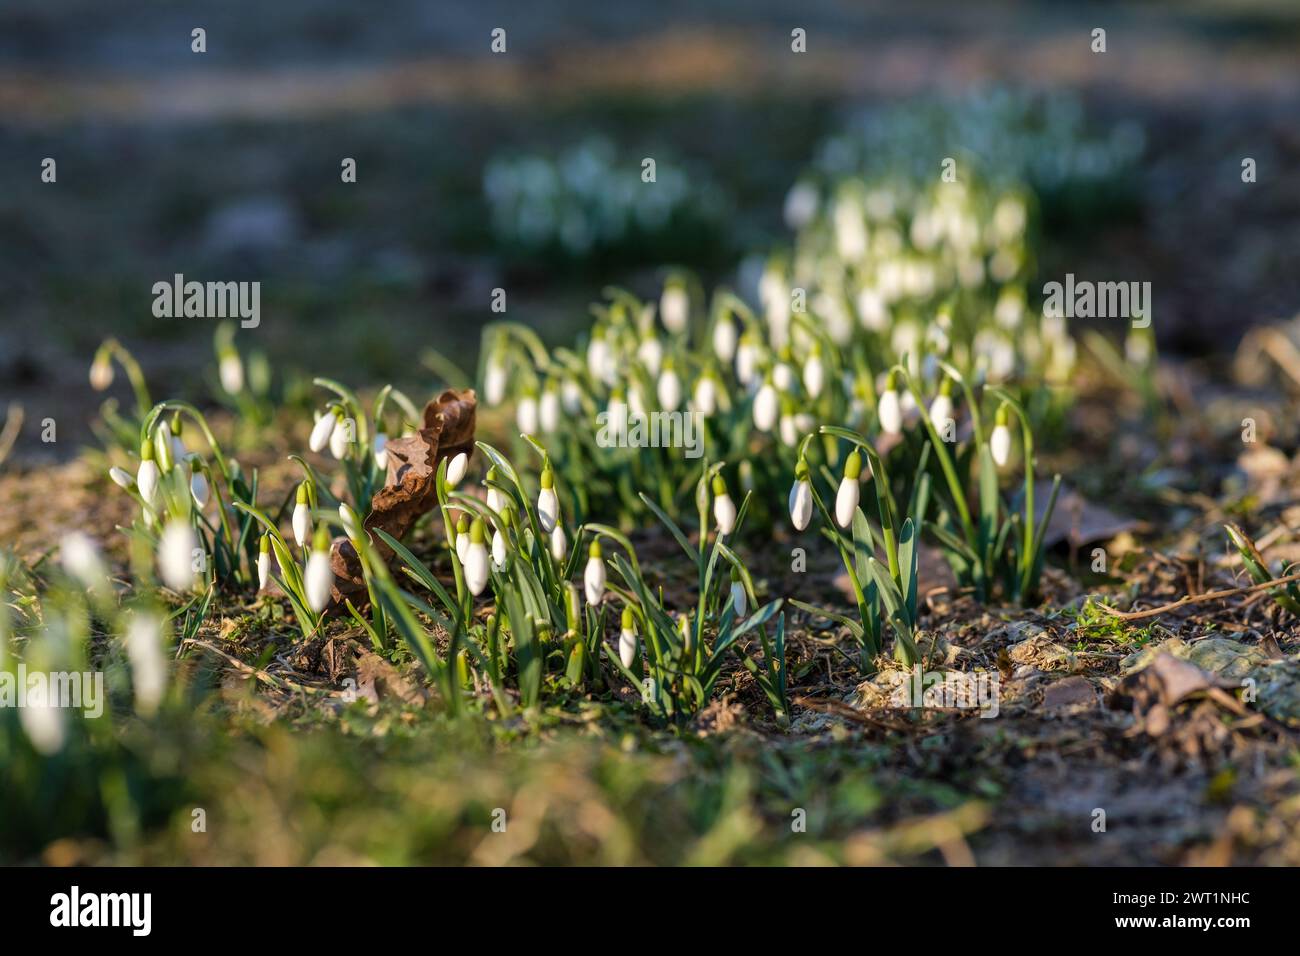 Nature's symphony begins with the delicate melody of snowdrops in Latvia's spring air Stock Photo